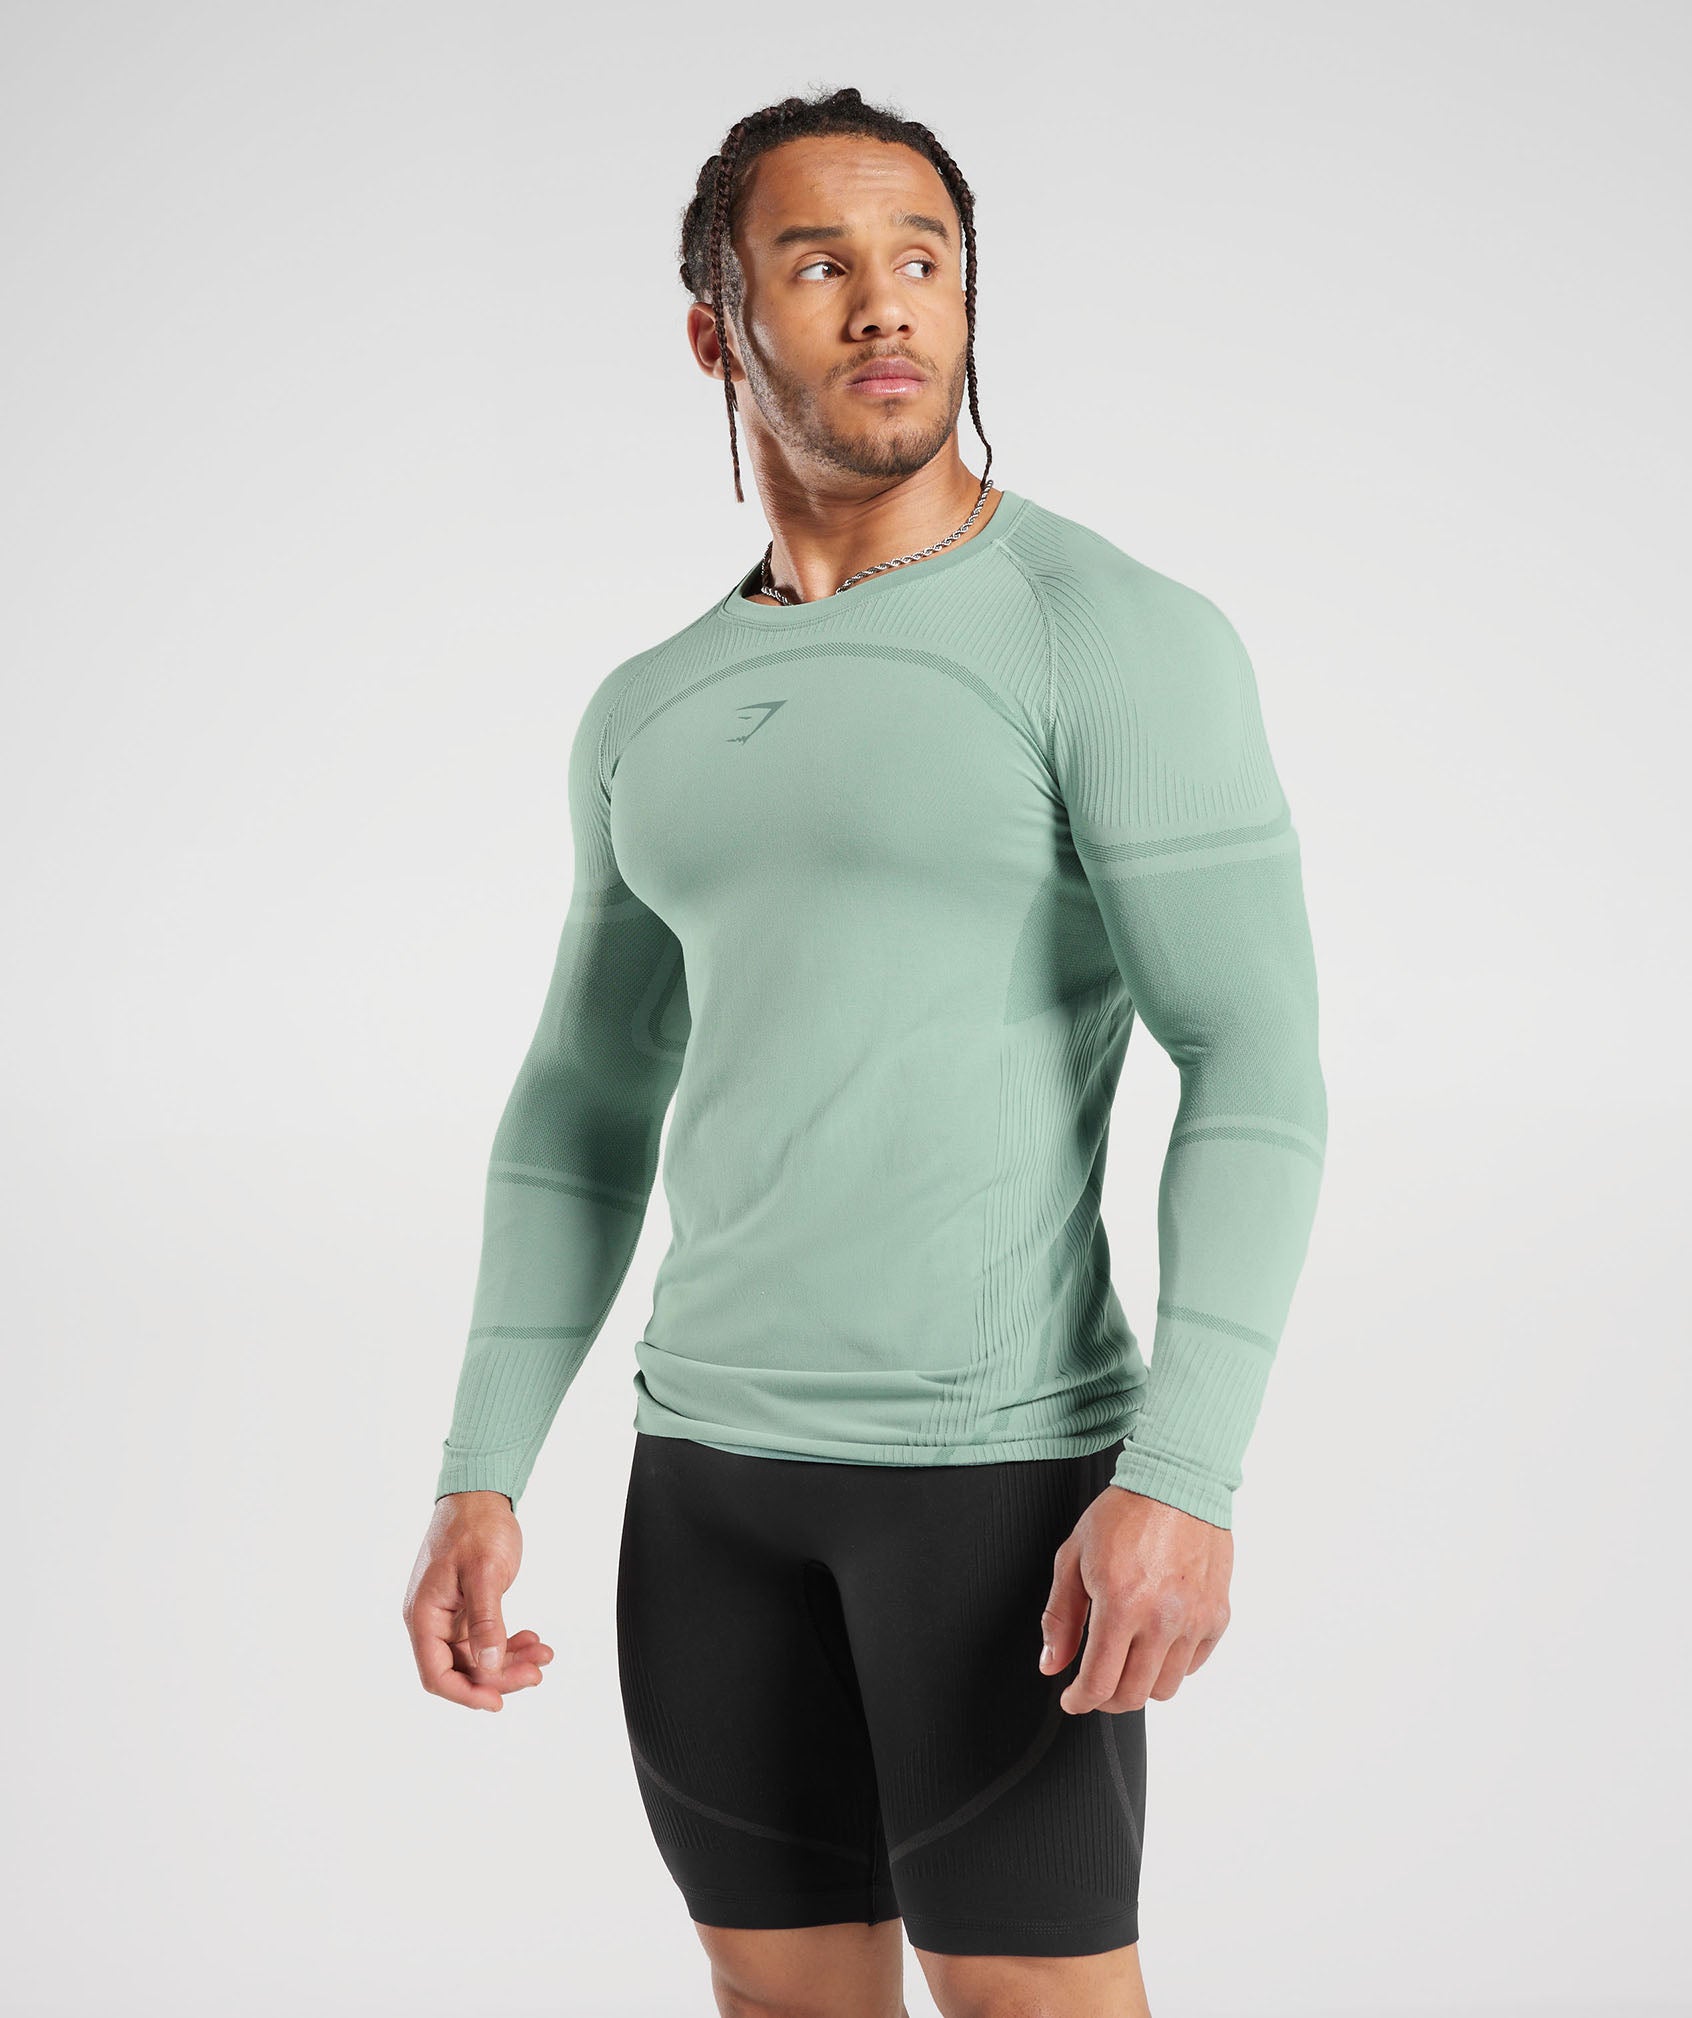 315 Seamless Long Sleeve T-Shirt in Frost Teal/Ink Teal - view 3